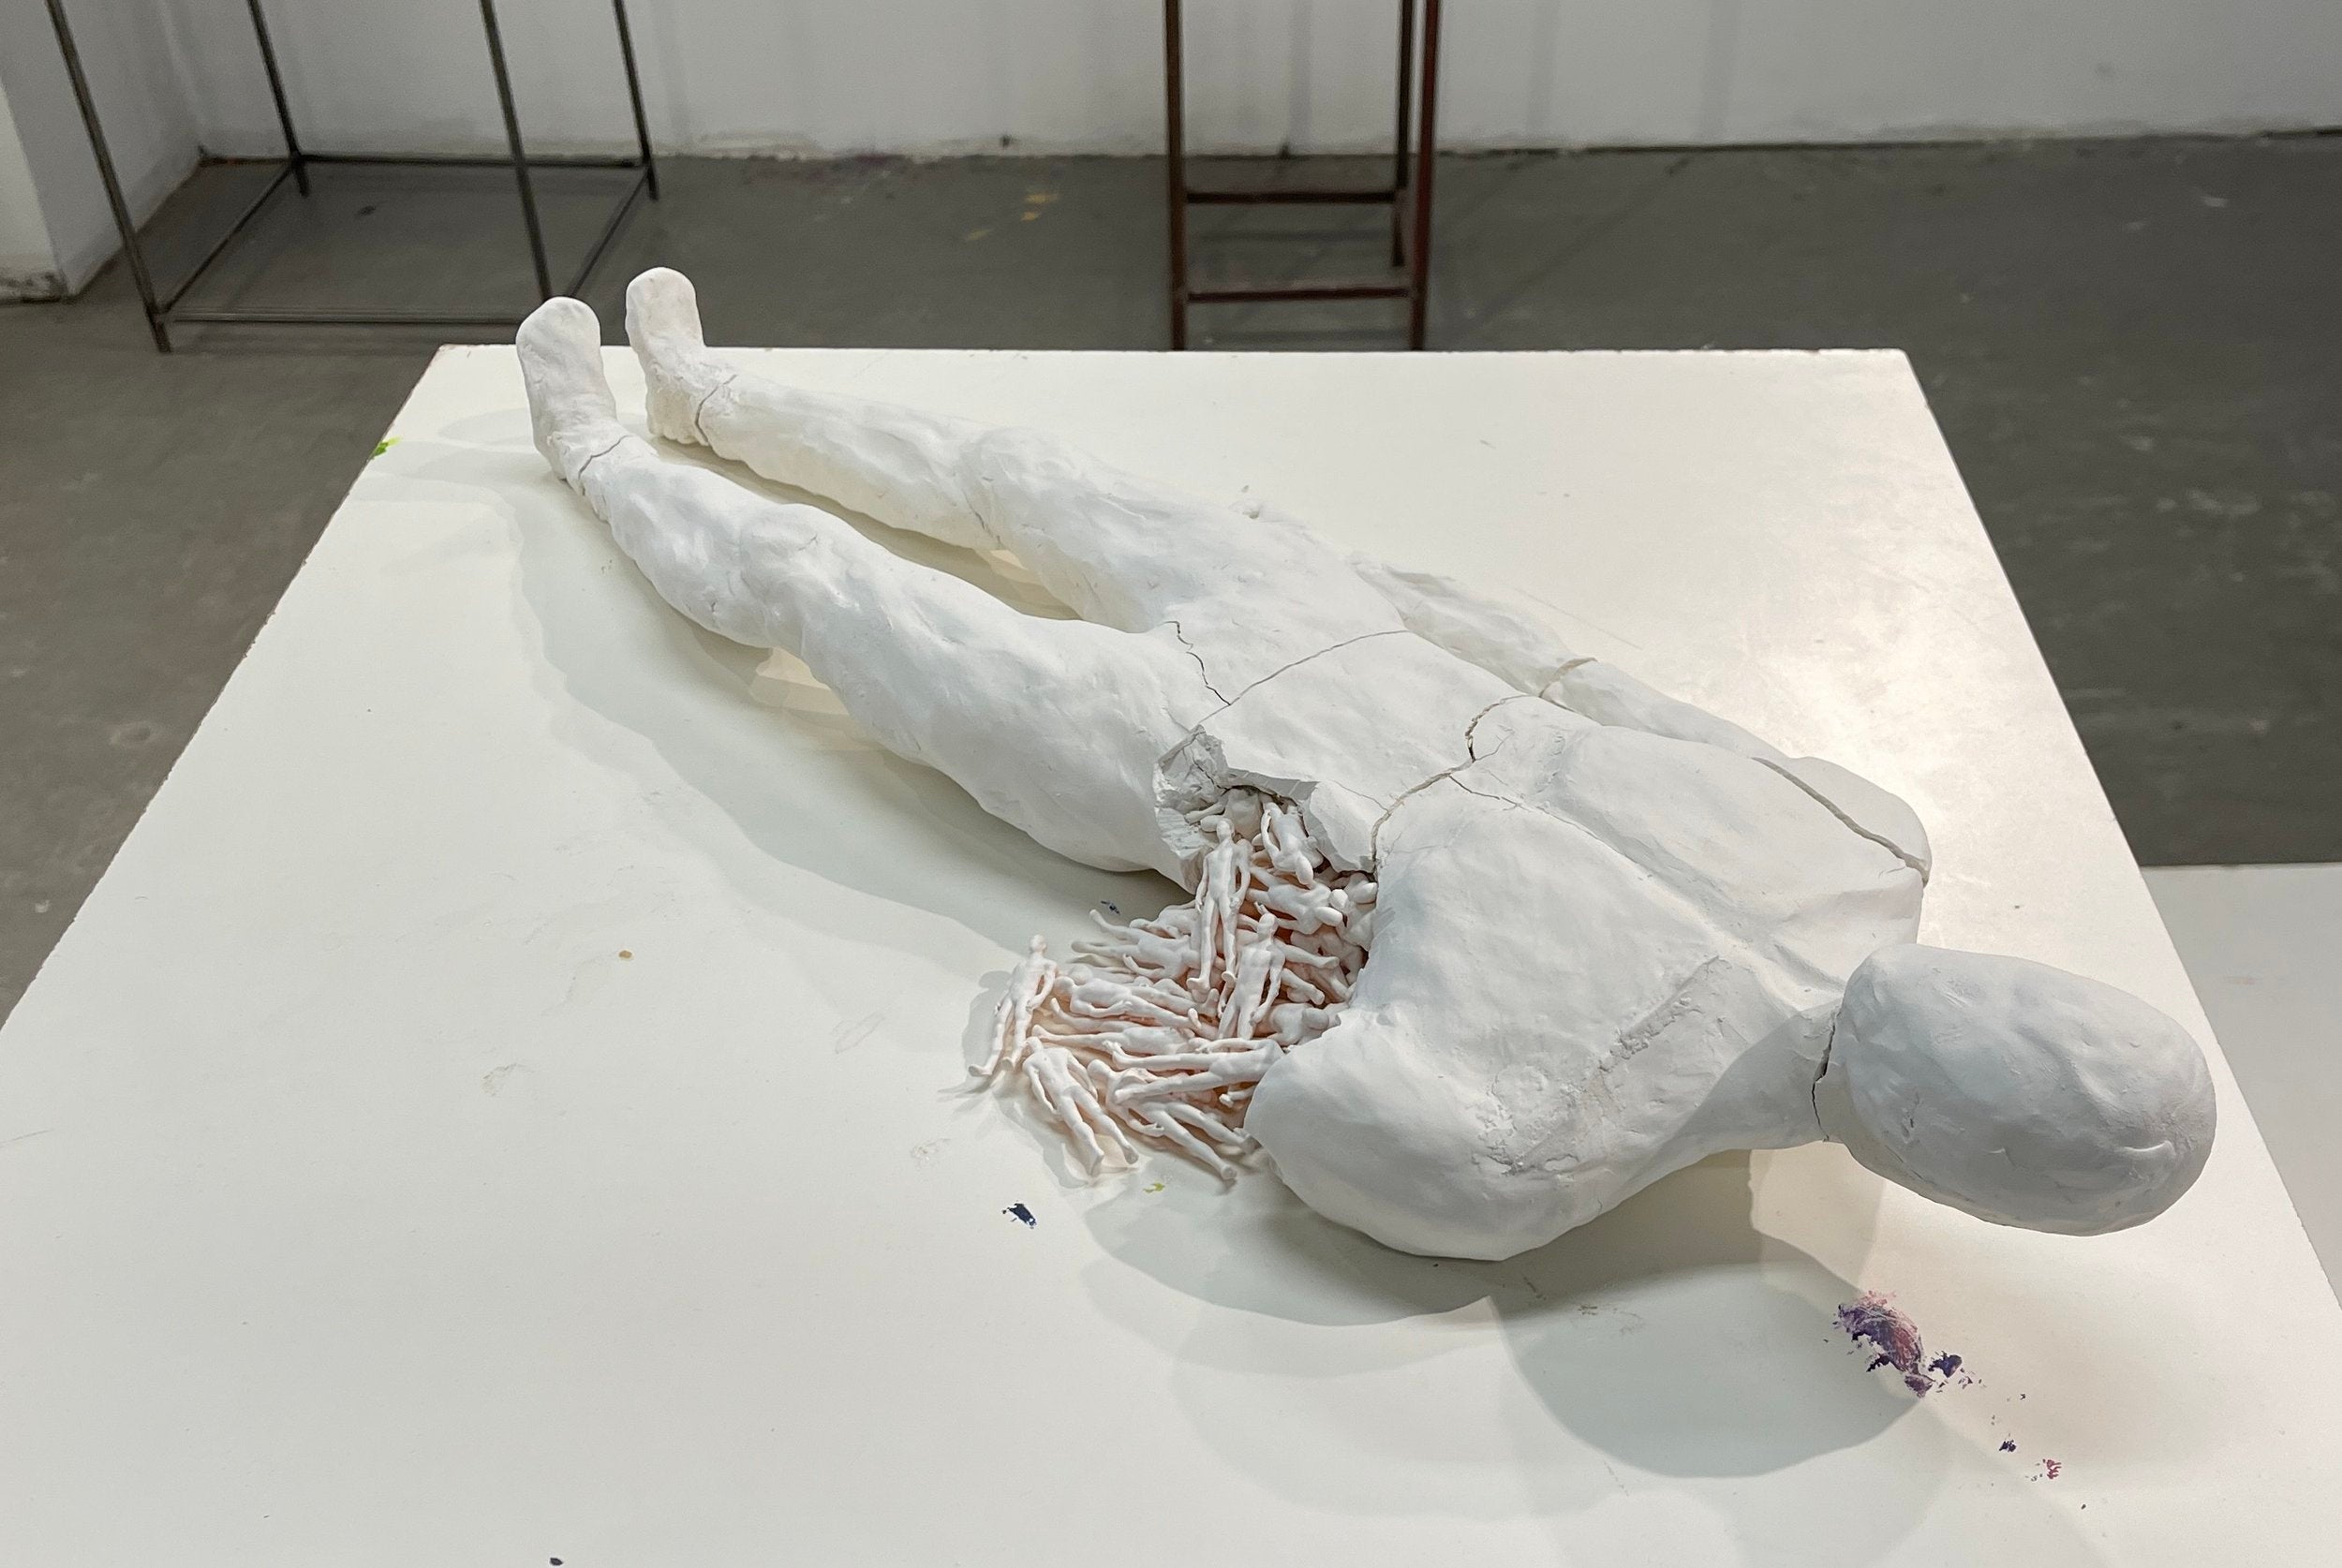 Sculpture of person lying down with a fracture on their side. From the fracture emerges smaller replicas of the larger sculpture.